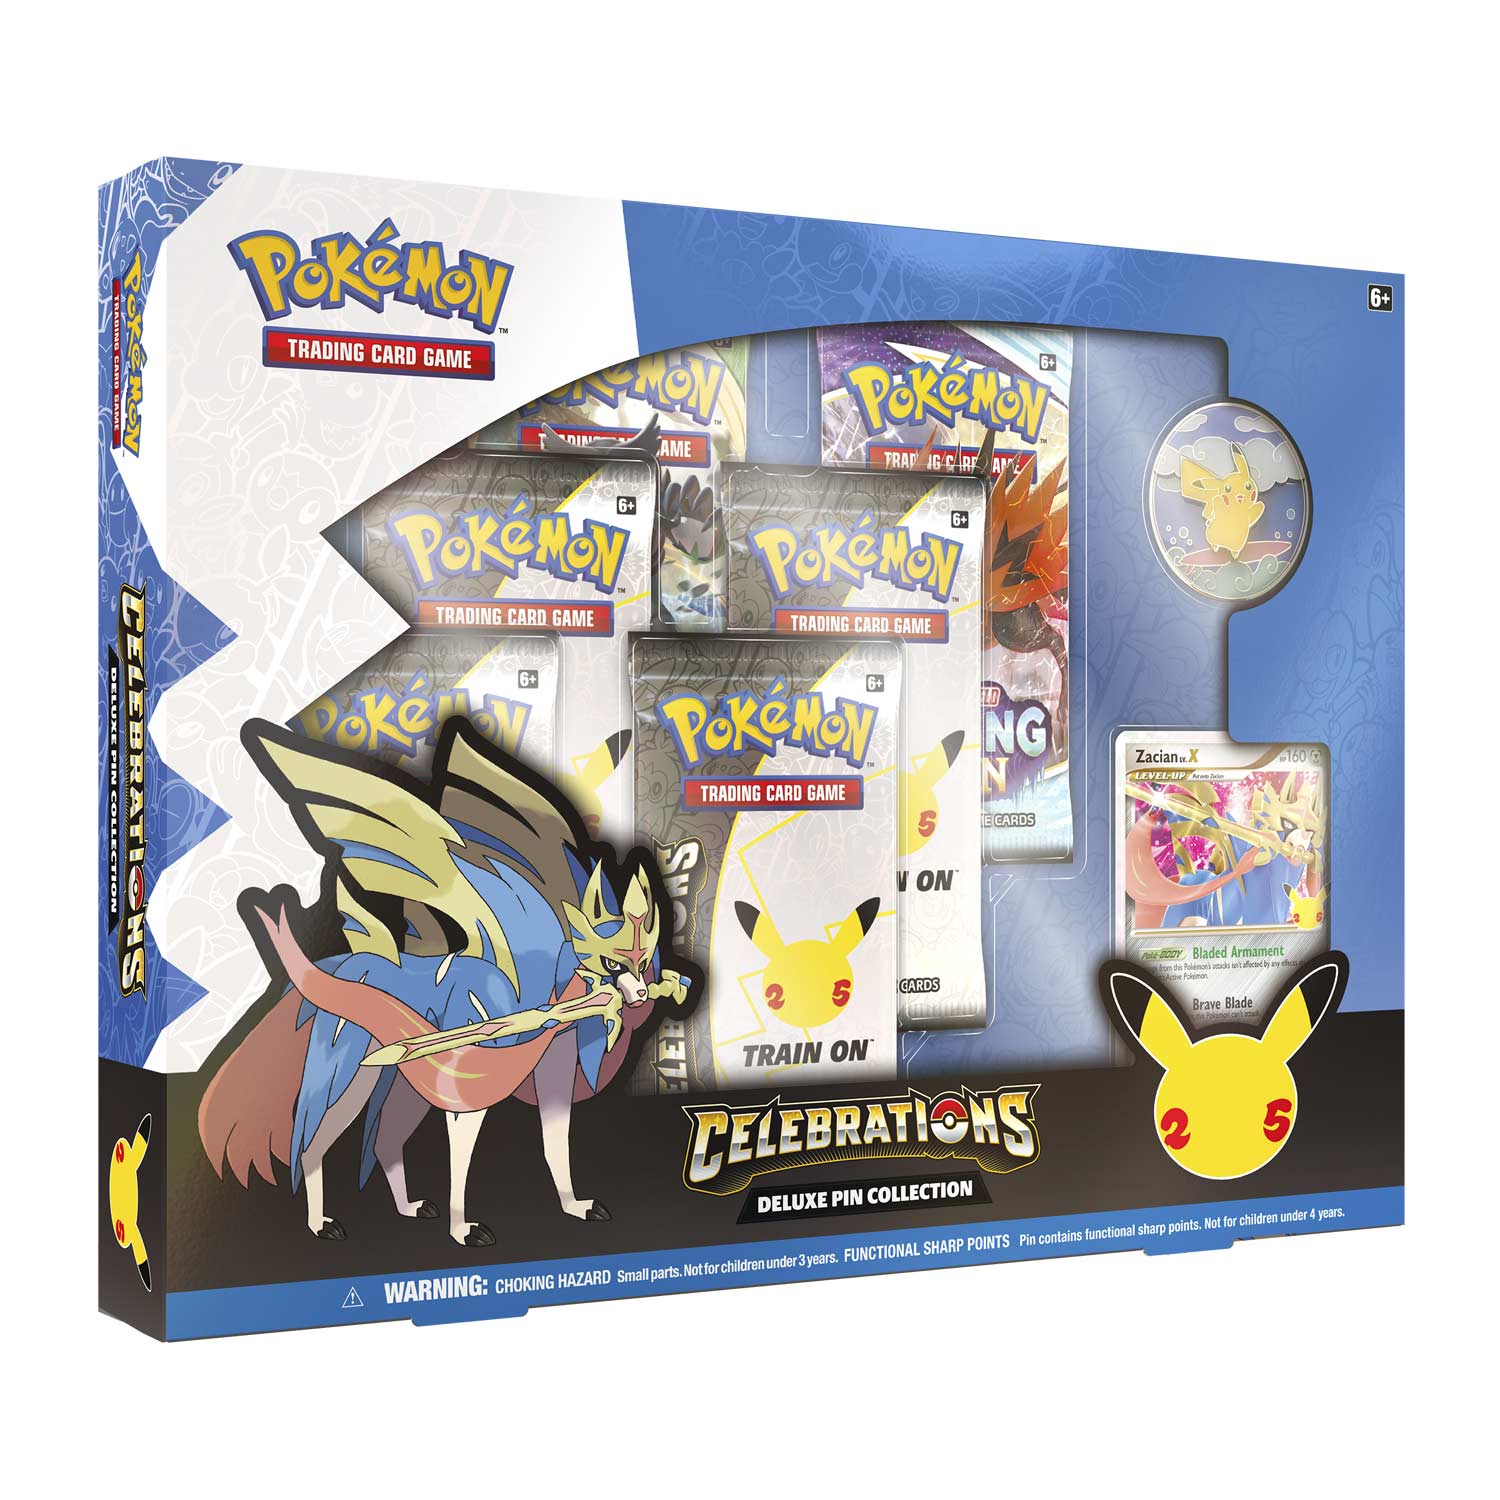 Pokémon TCG: Celebrations Deluxe Pin Collection Super Anime Store 